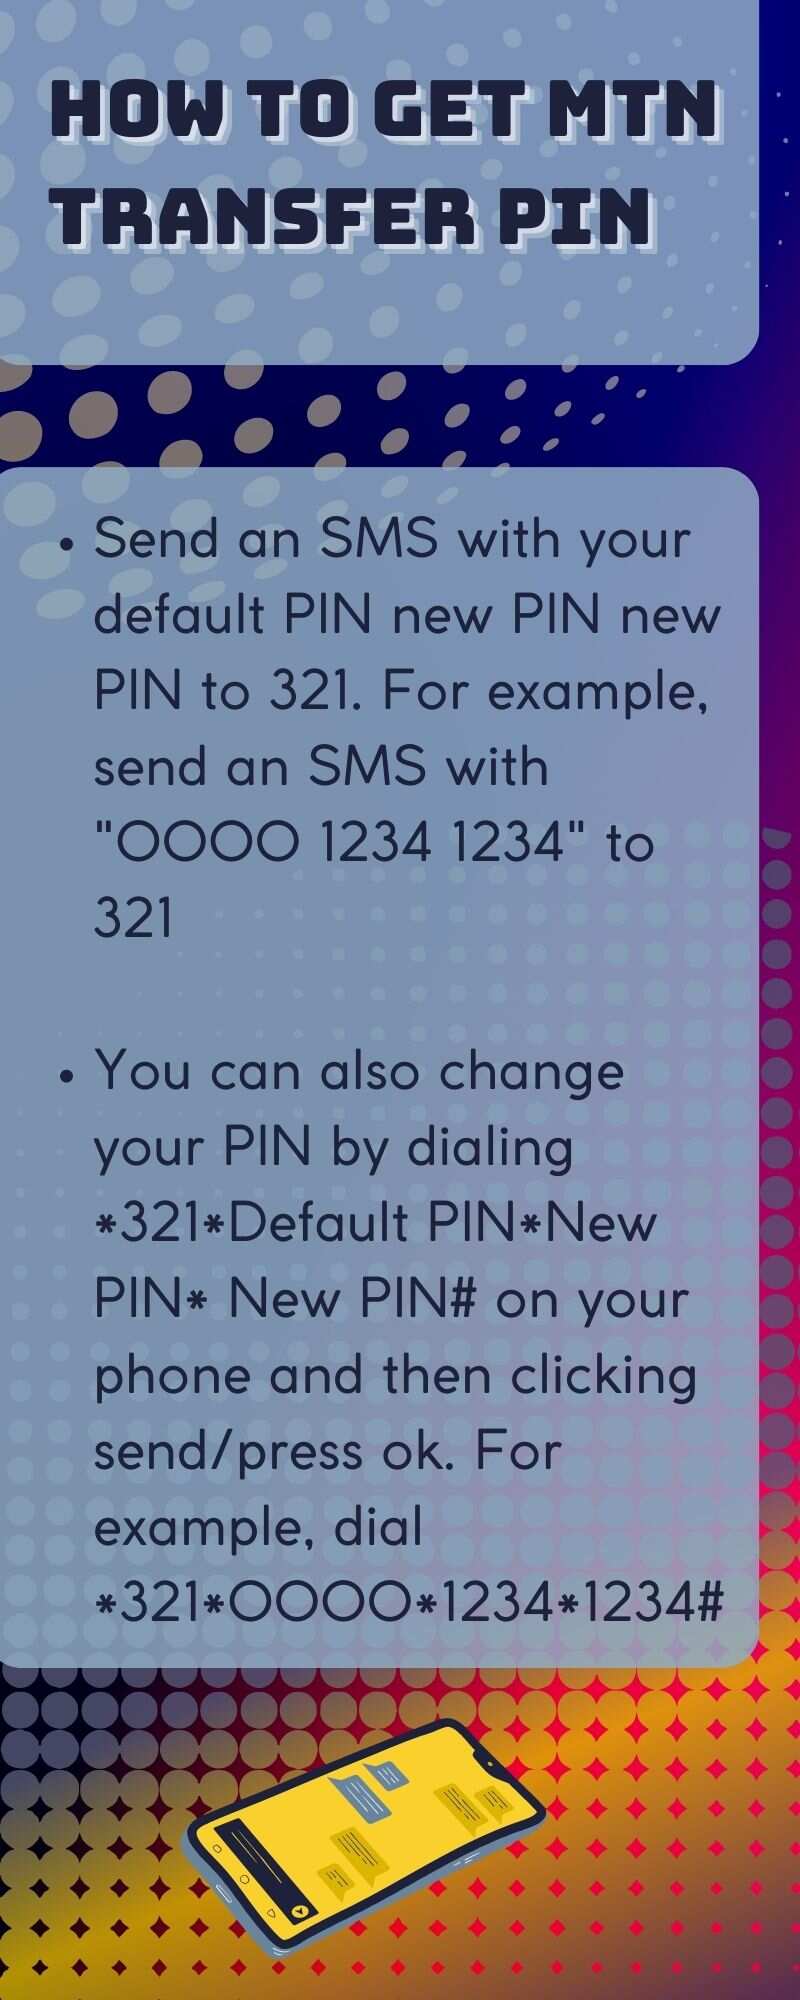 How to activate MTN transfer PIN code